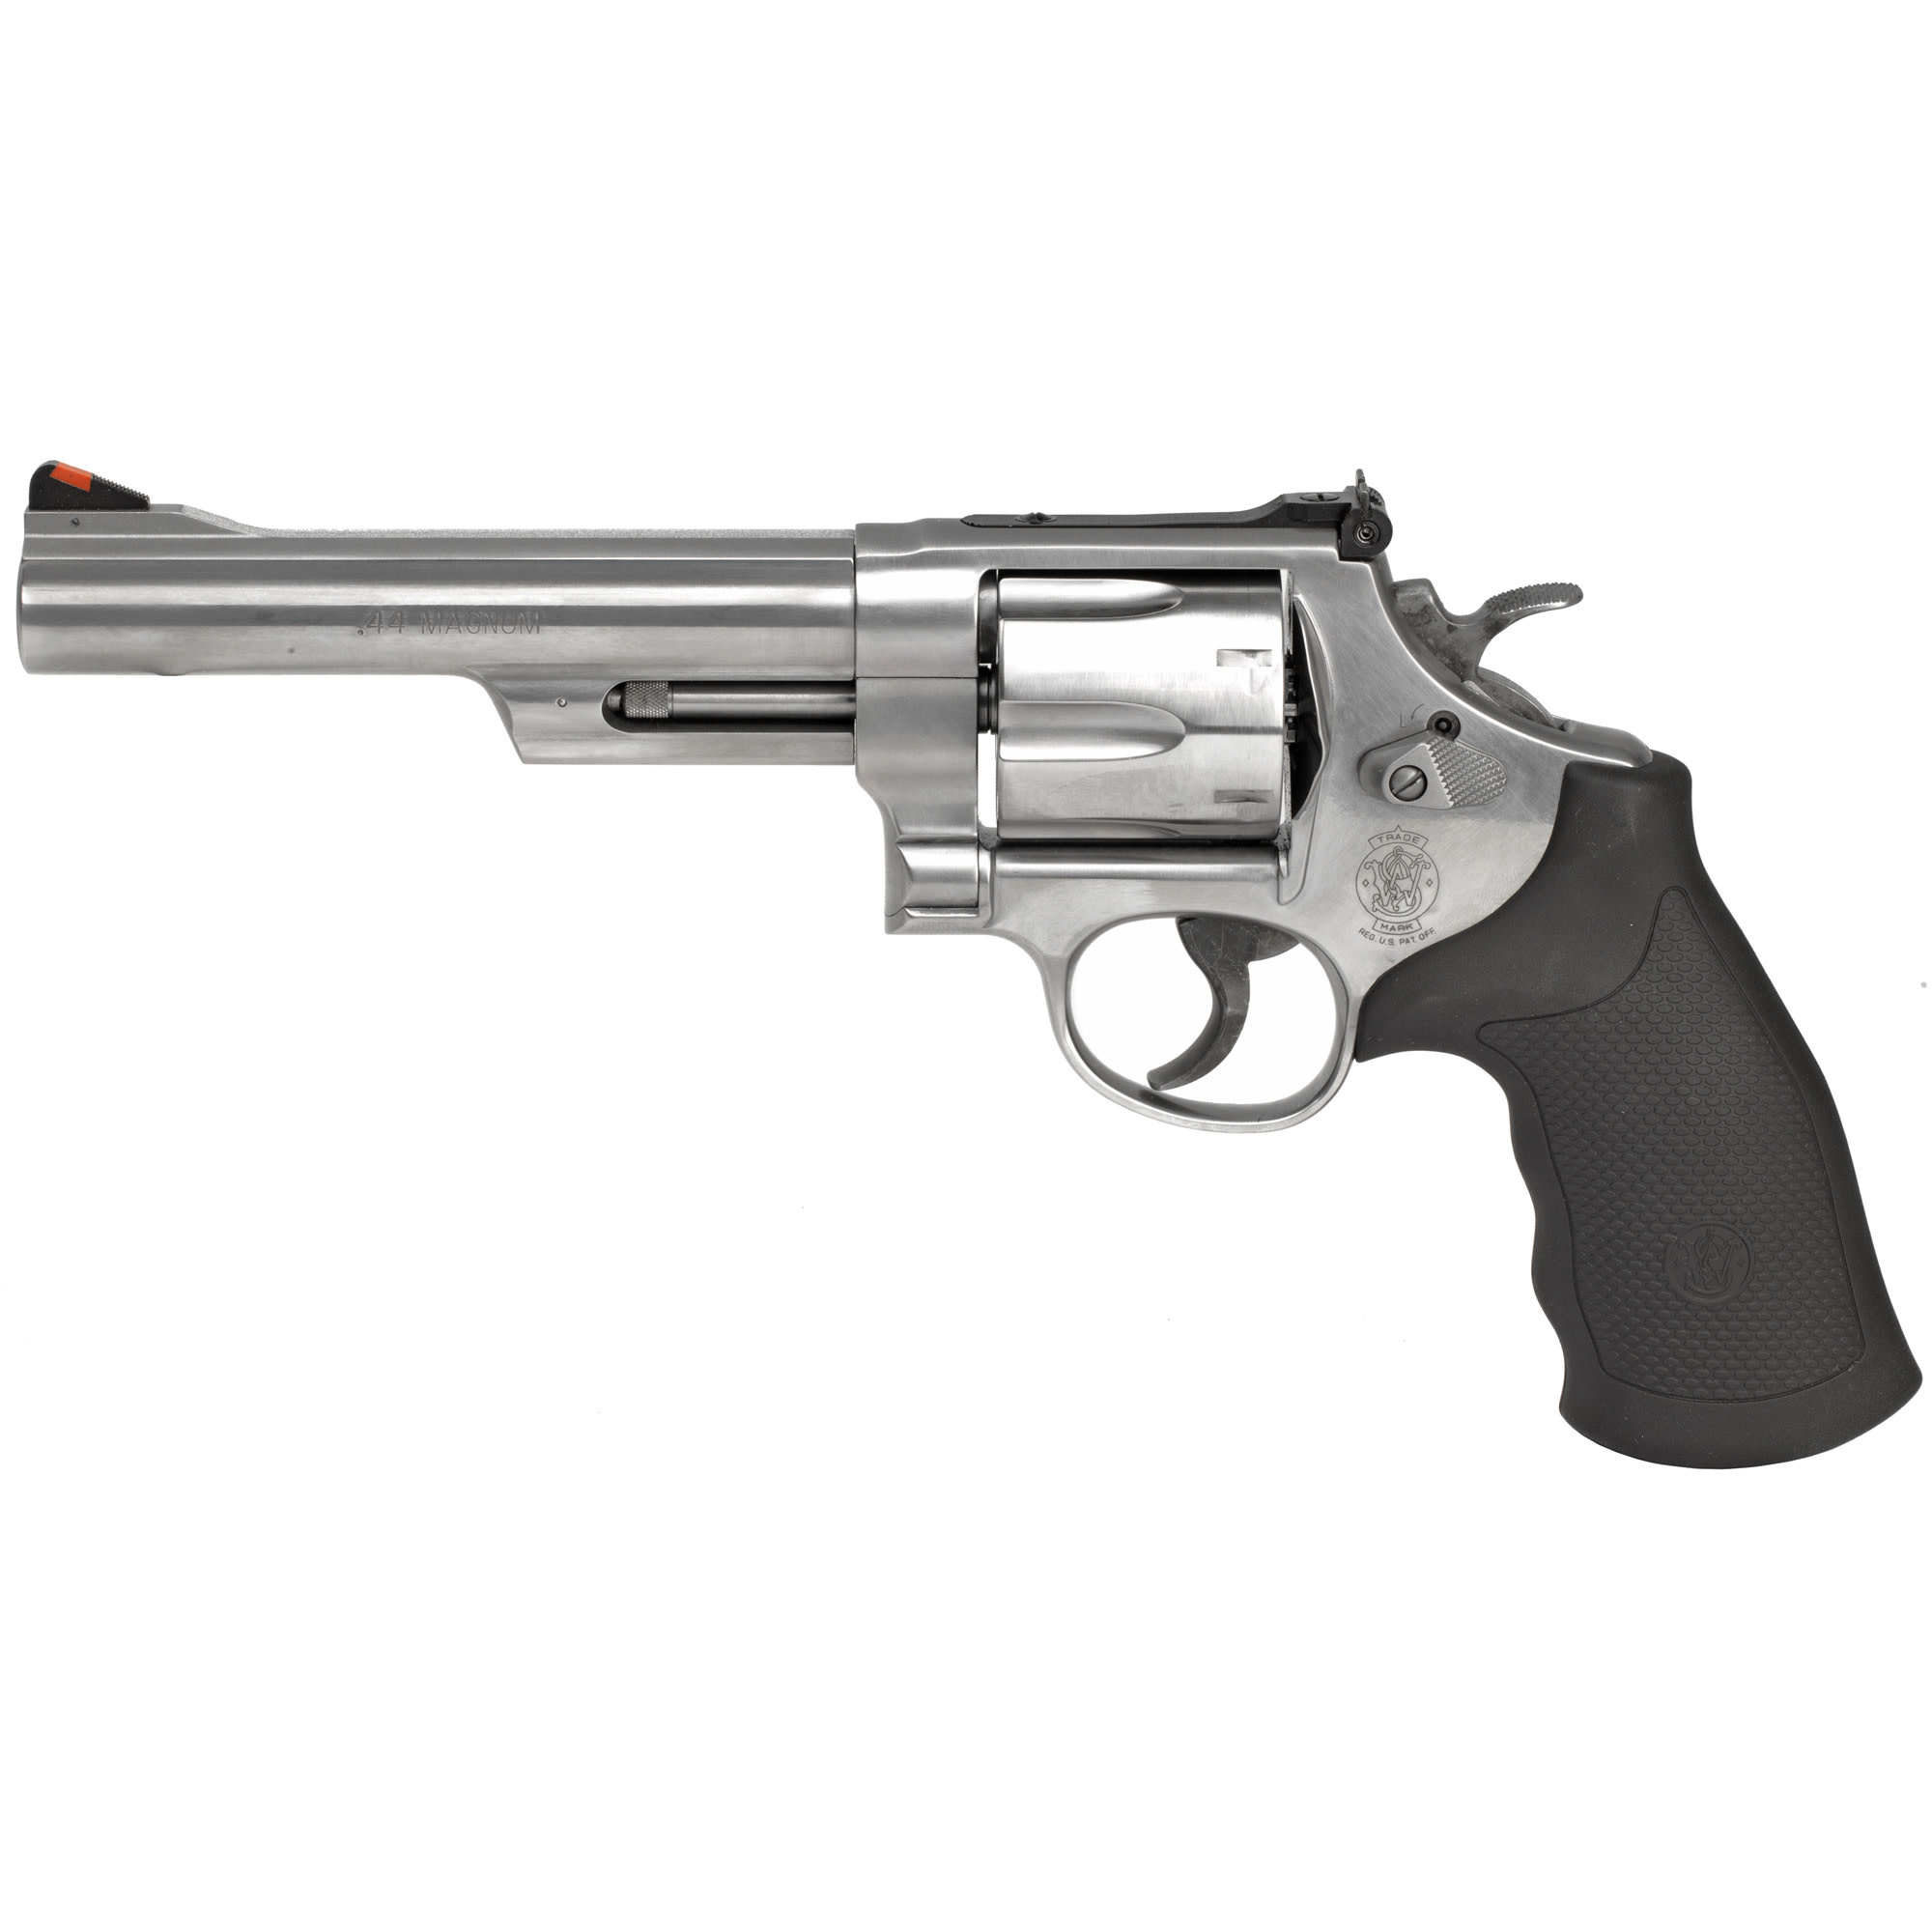 Smith & Wesson 629 44MAG 6" SS 6RD Revolver